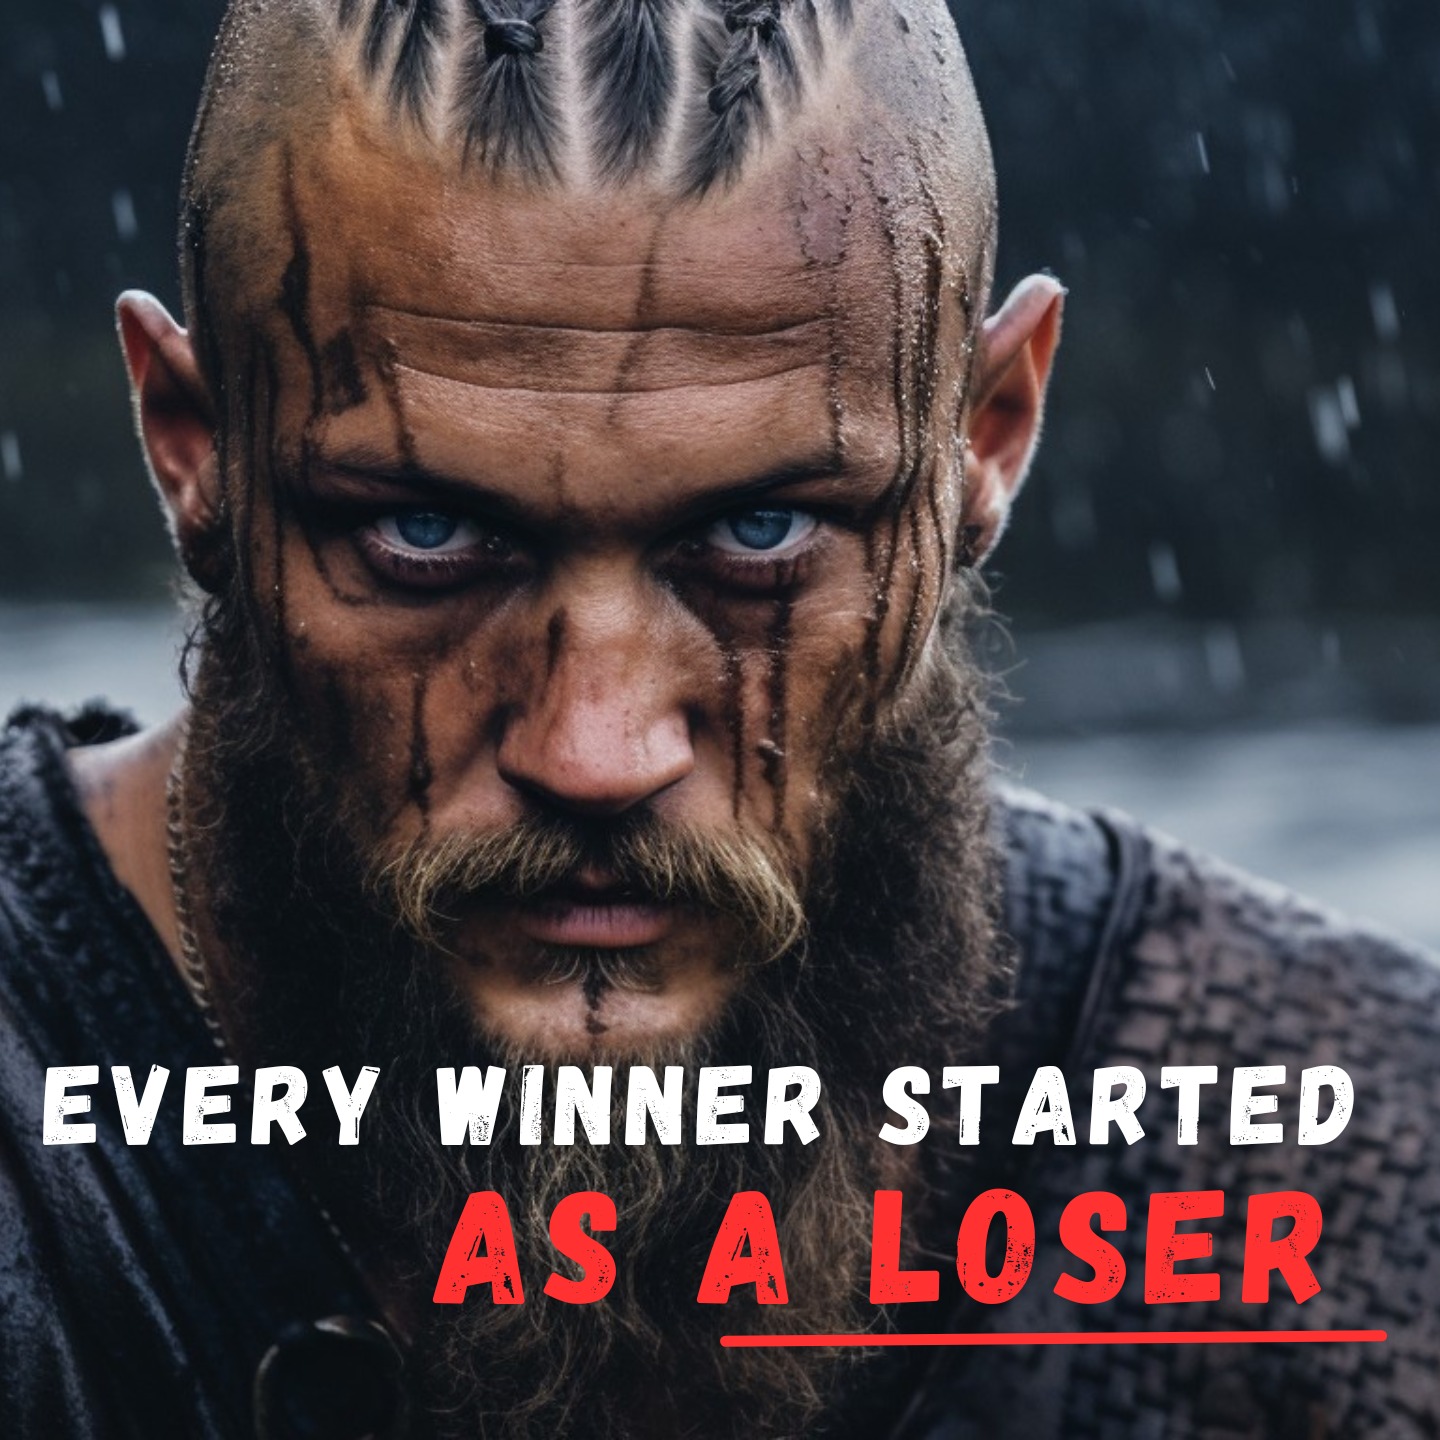 A WINNER IS A LOSER WHO TRIED ONE MORE TIME - Best Motivational Speech